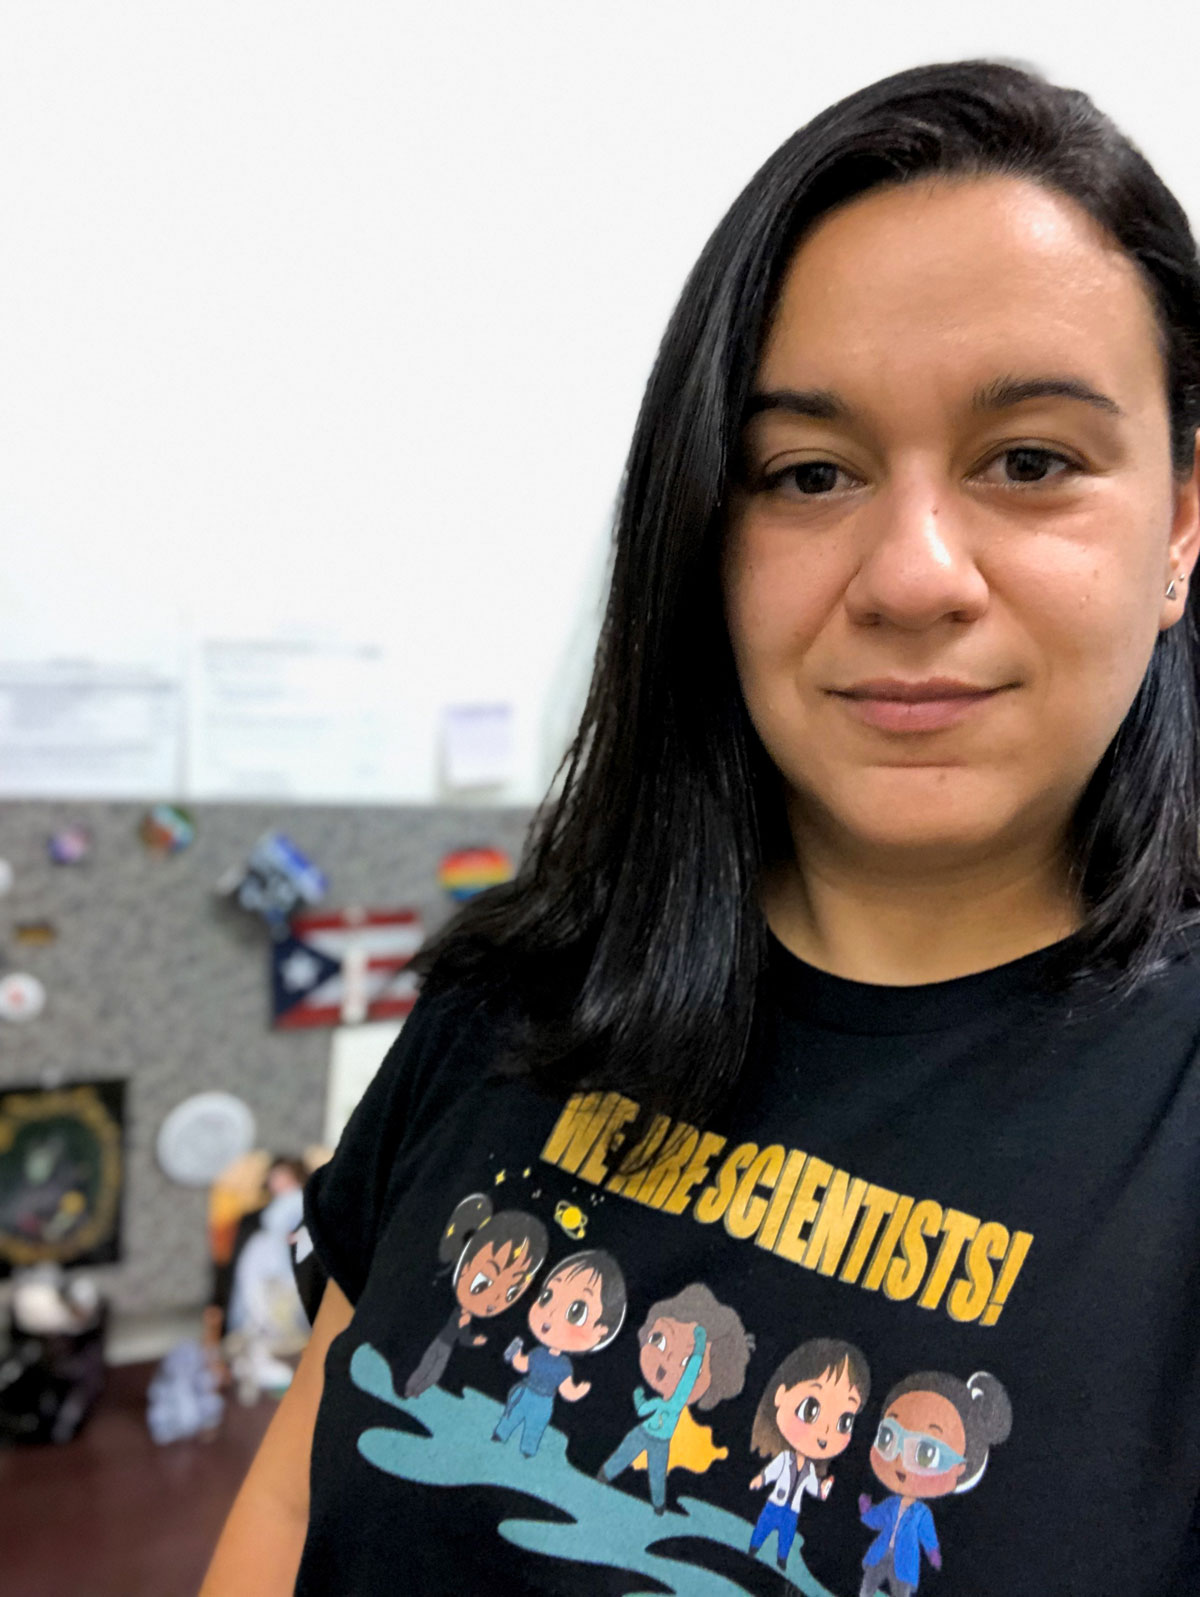 Semarhy Quinones-Soto wearing a black shirt reading "We Are Scientists"